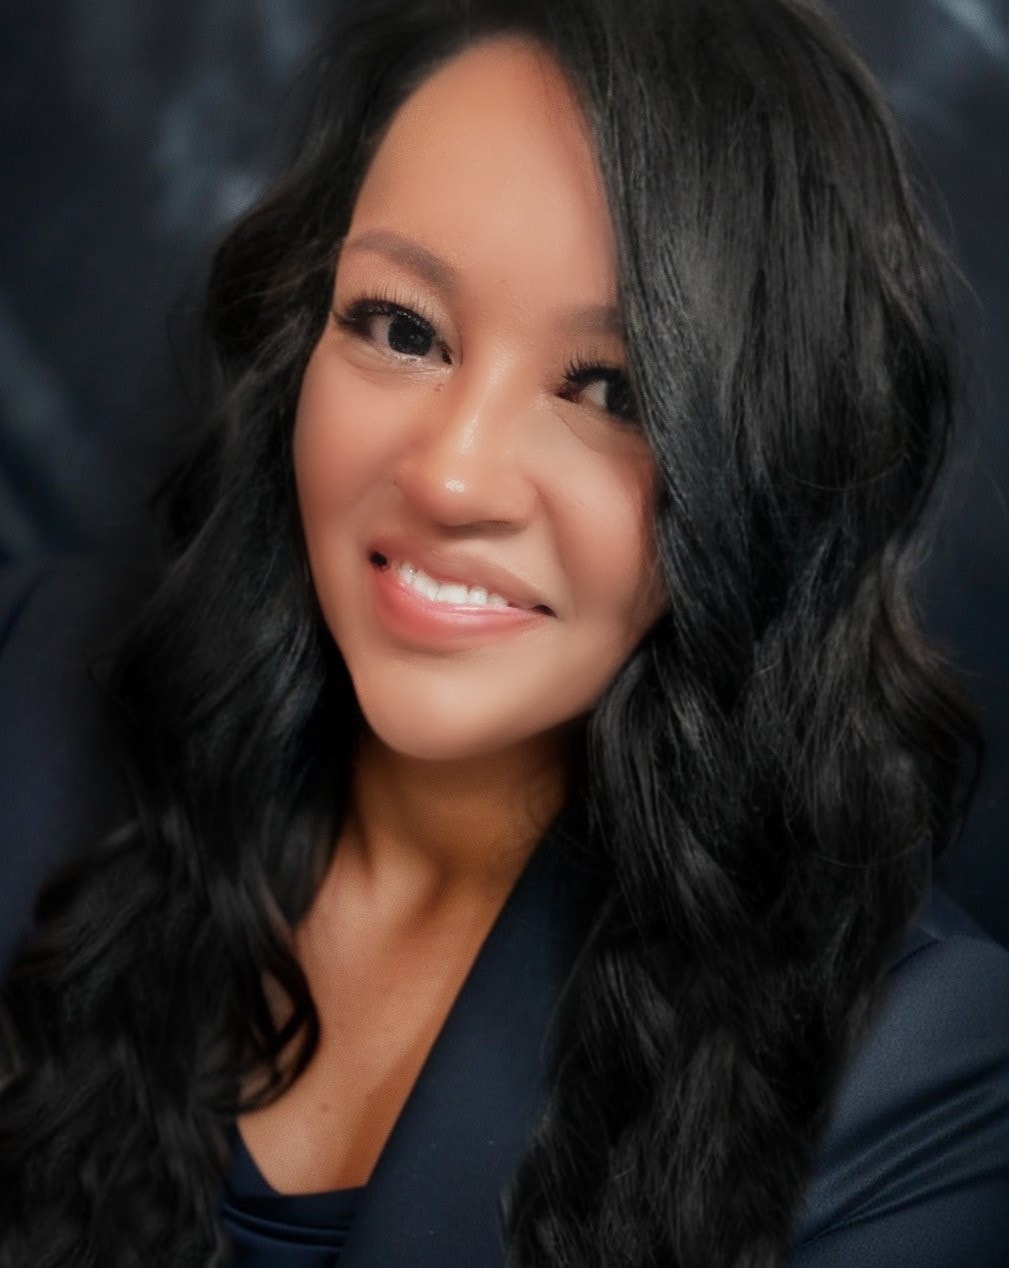 picture of latina with black hair and smiling looking at the camera dressed in a deep navy blue suit